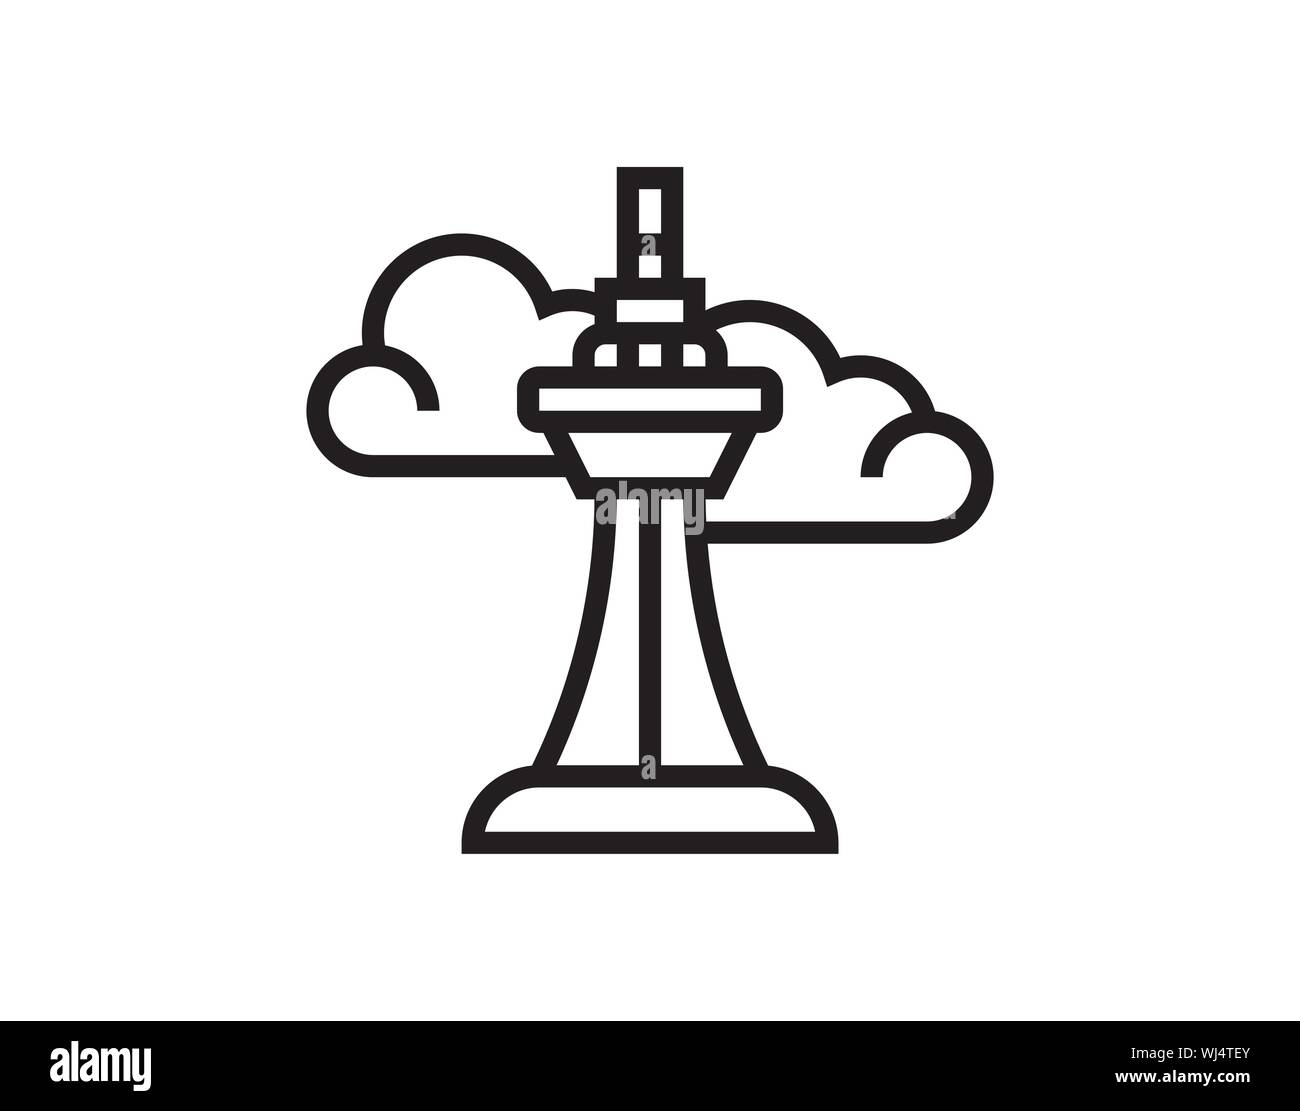 control tower icon on white background Stock Vector